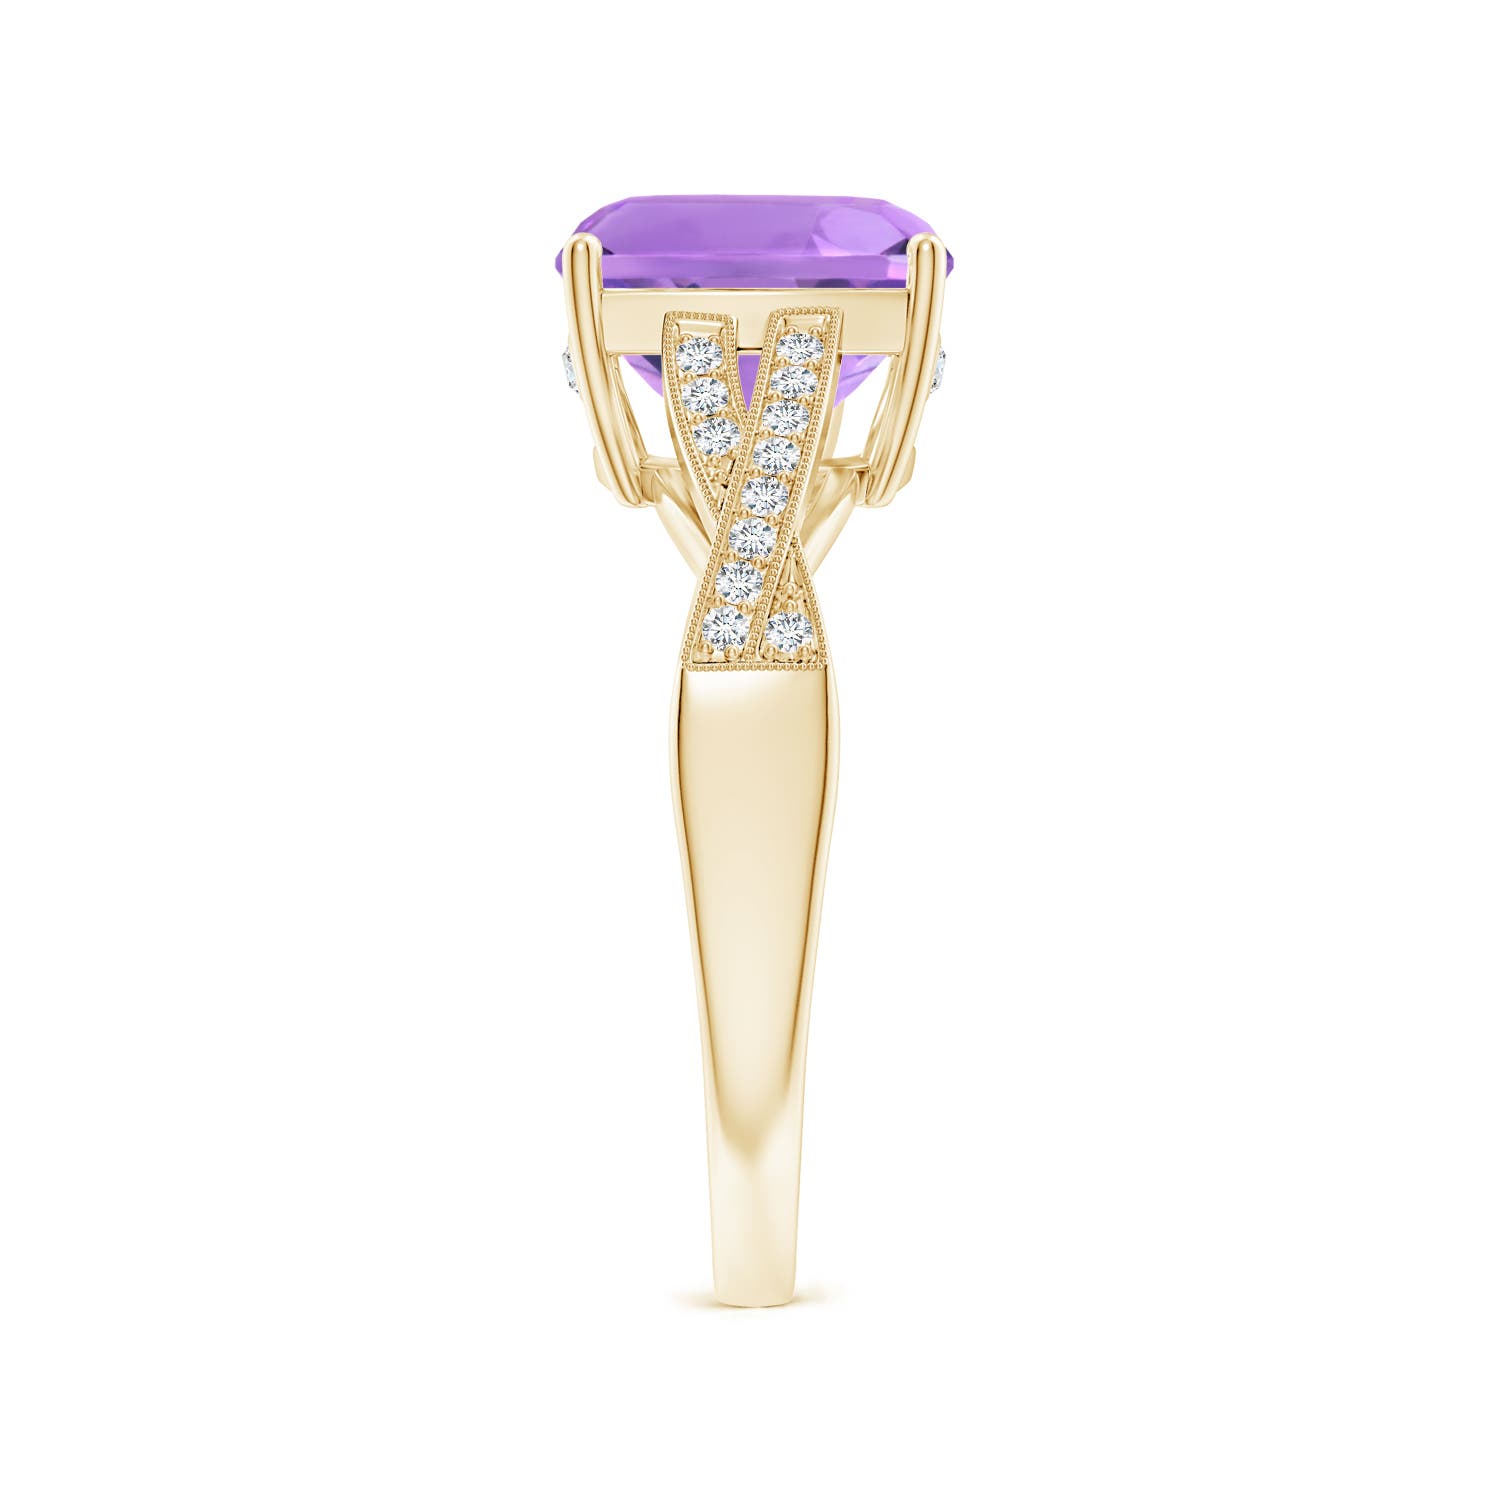 A - Amethyst / 3.24 CT / 14 KT Yellow Gold